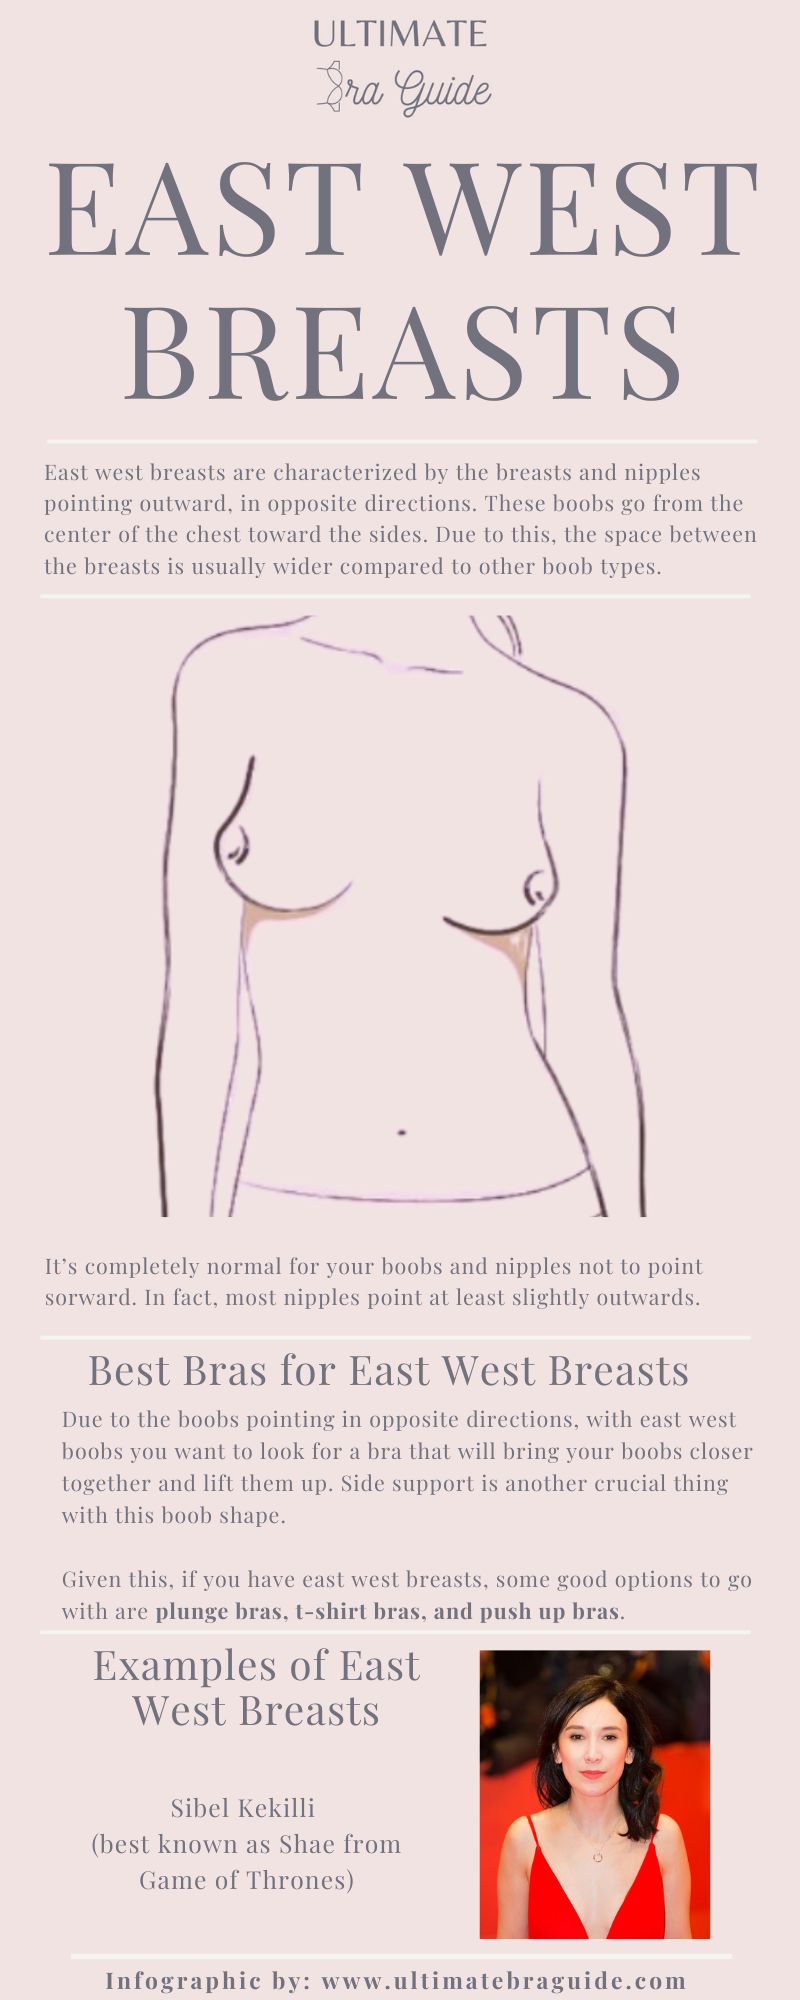 An infographic about east west breasts - what they are, what they look like, what are the best bras for them, and some celebrities with east west boobs